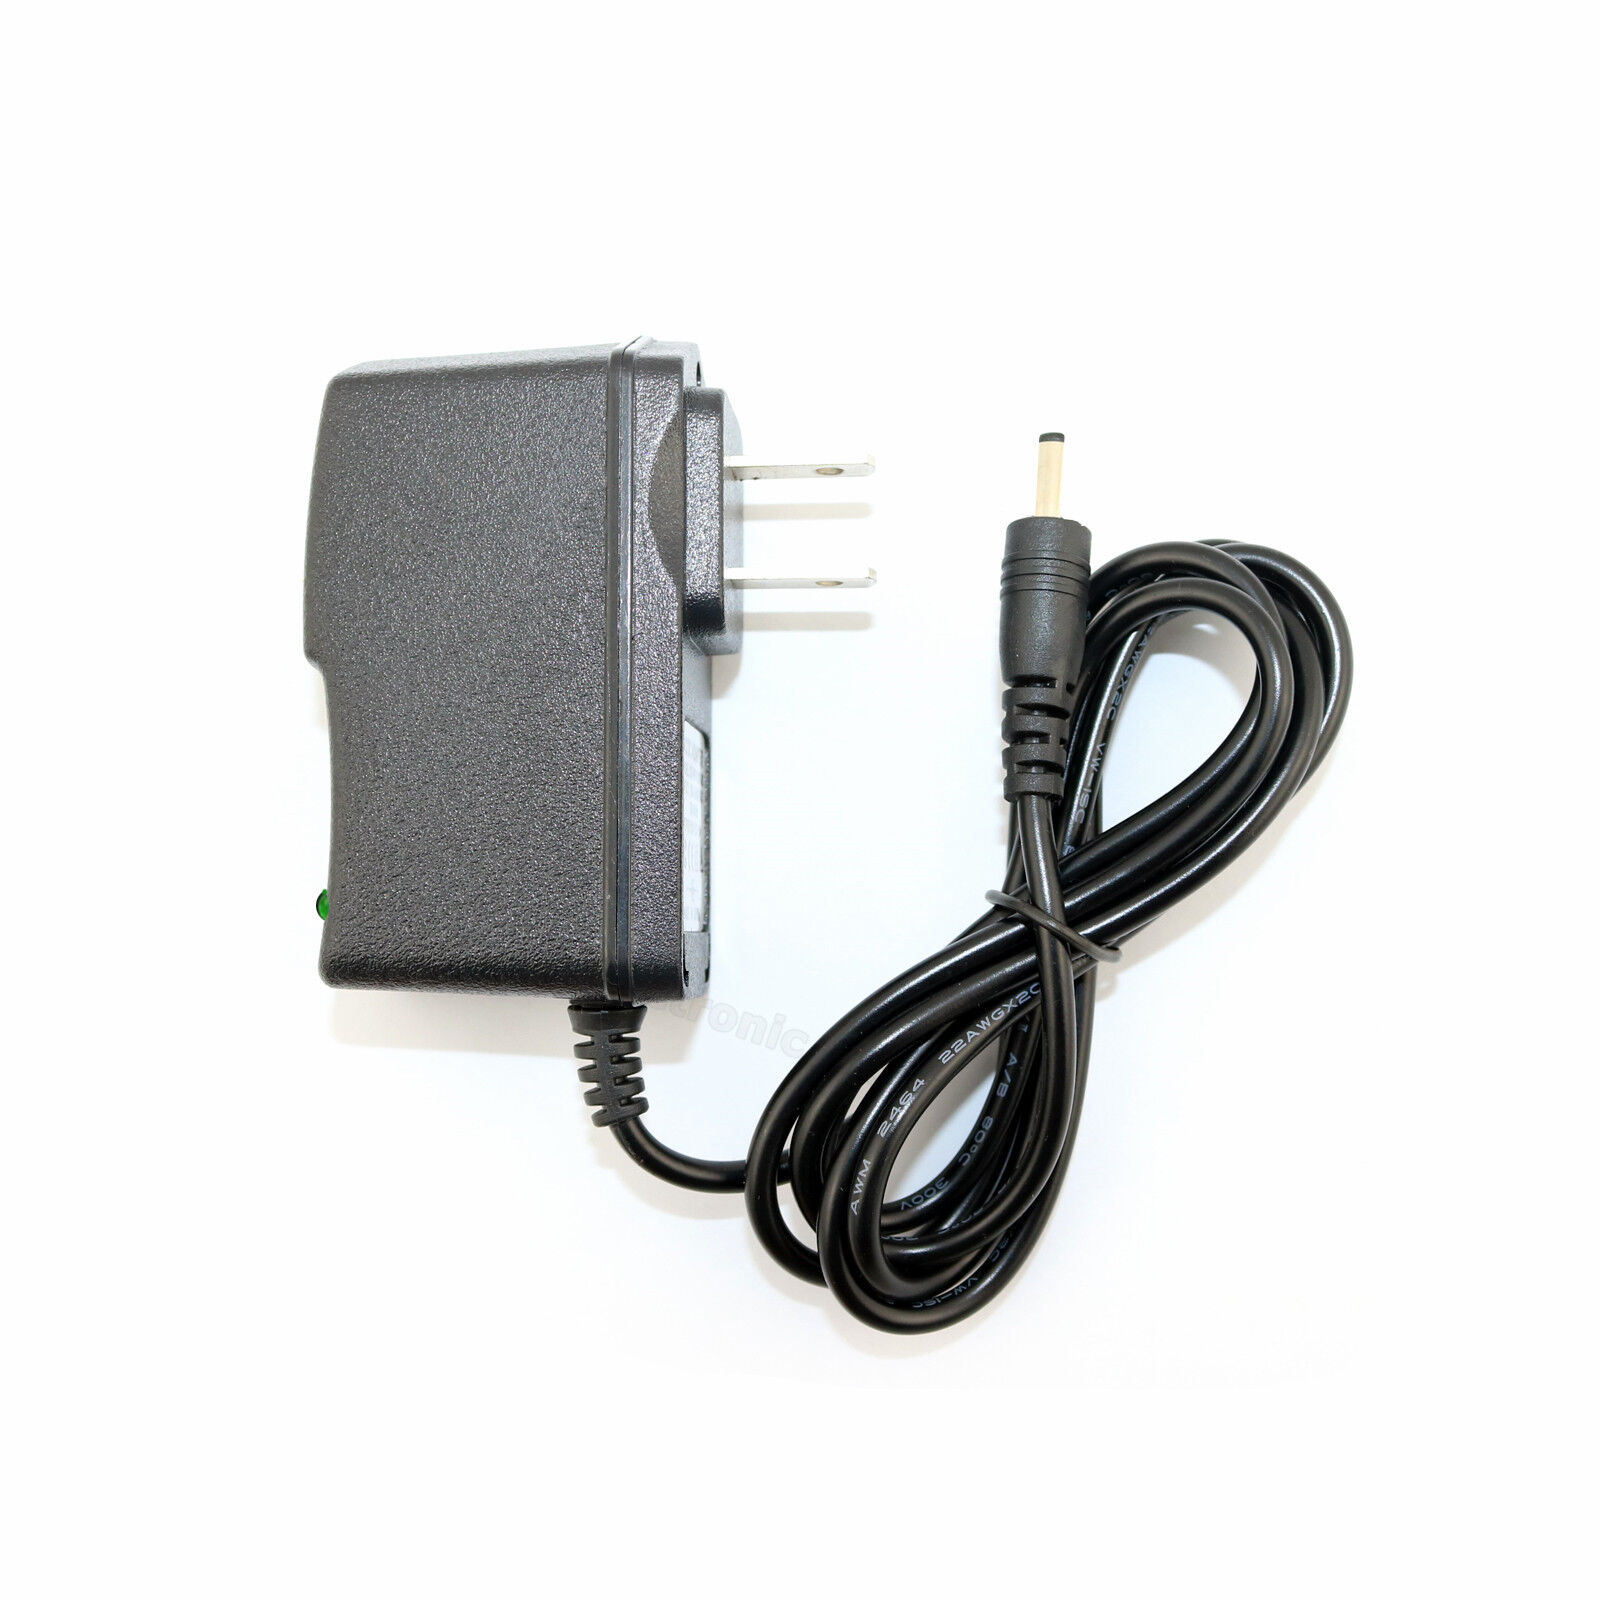 Mains Charger for the Artfone C1 GSM Big Button Mobile Phone A Brand New Mains Charger for this Mobile Phone A brand n